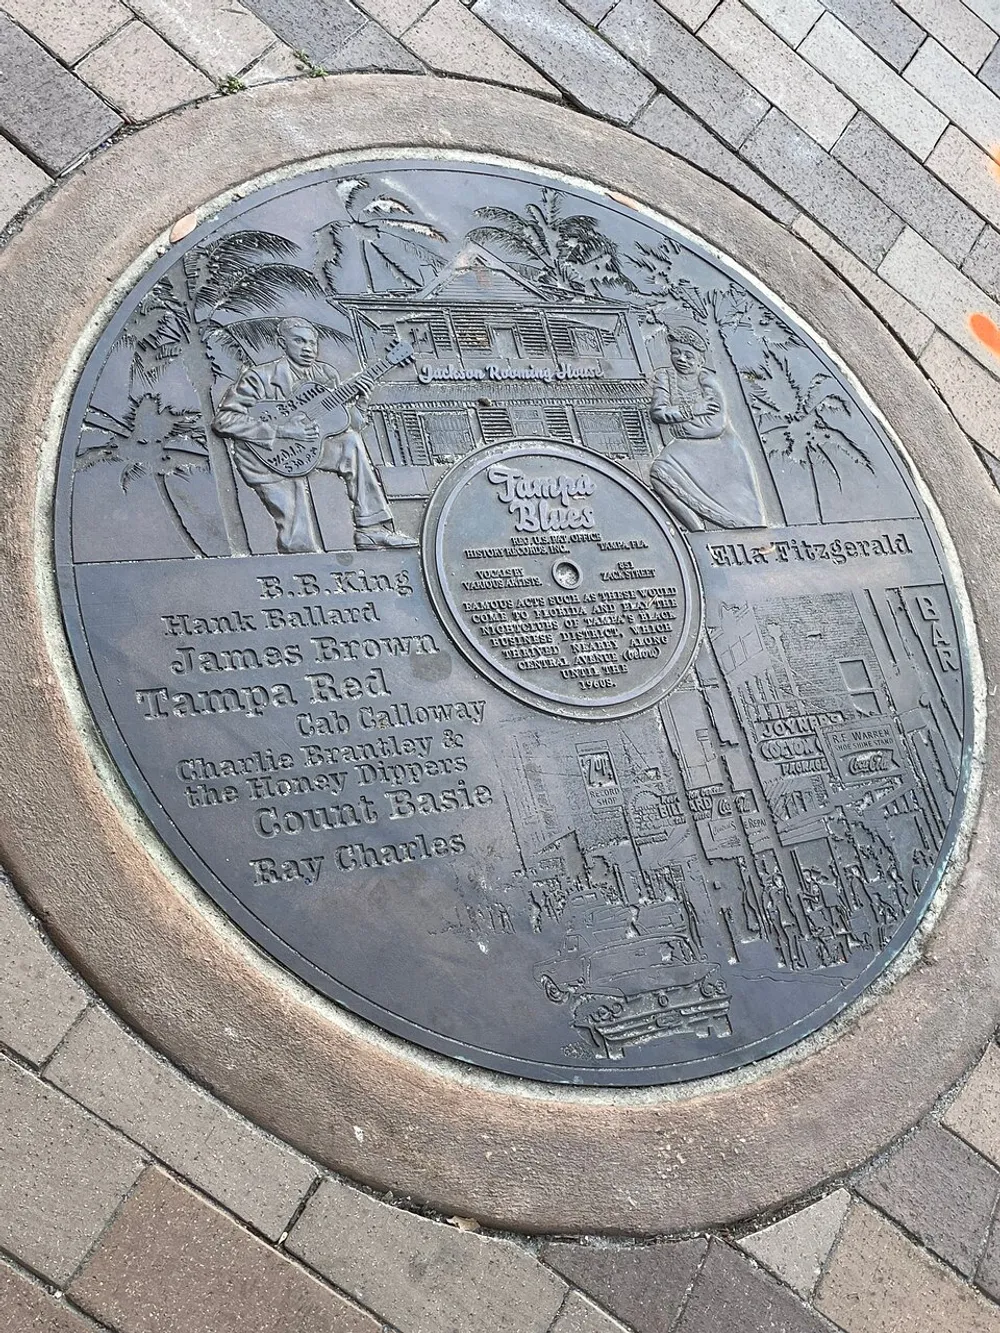 This image features a commemorative plaque embedded in the ground celebrating artists of the Tampa Blues genre with intricate engravings and names including BB King James Brown Ella Fitzgerald and Ray Charles